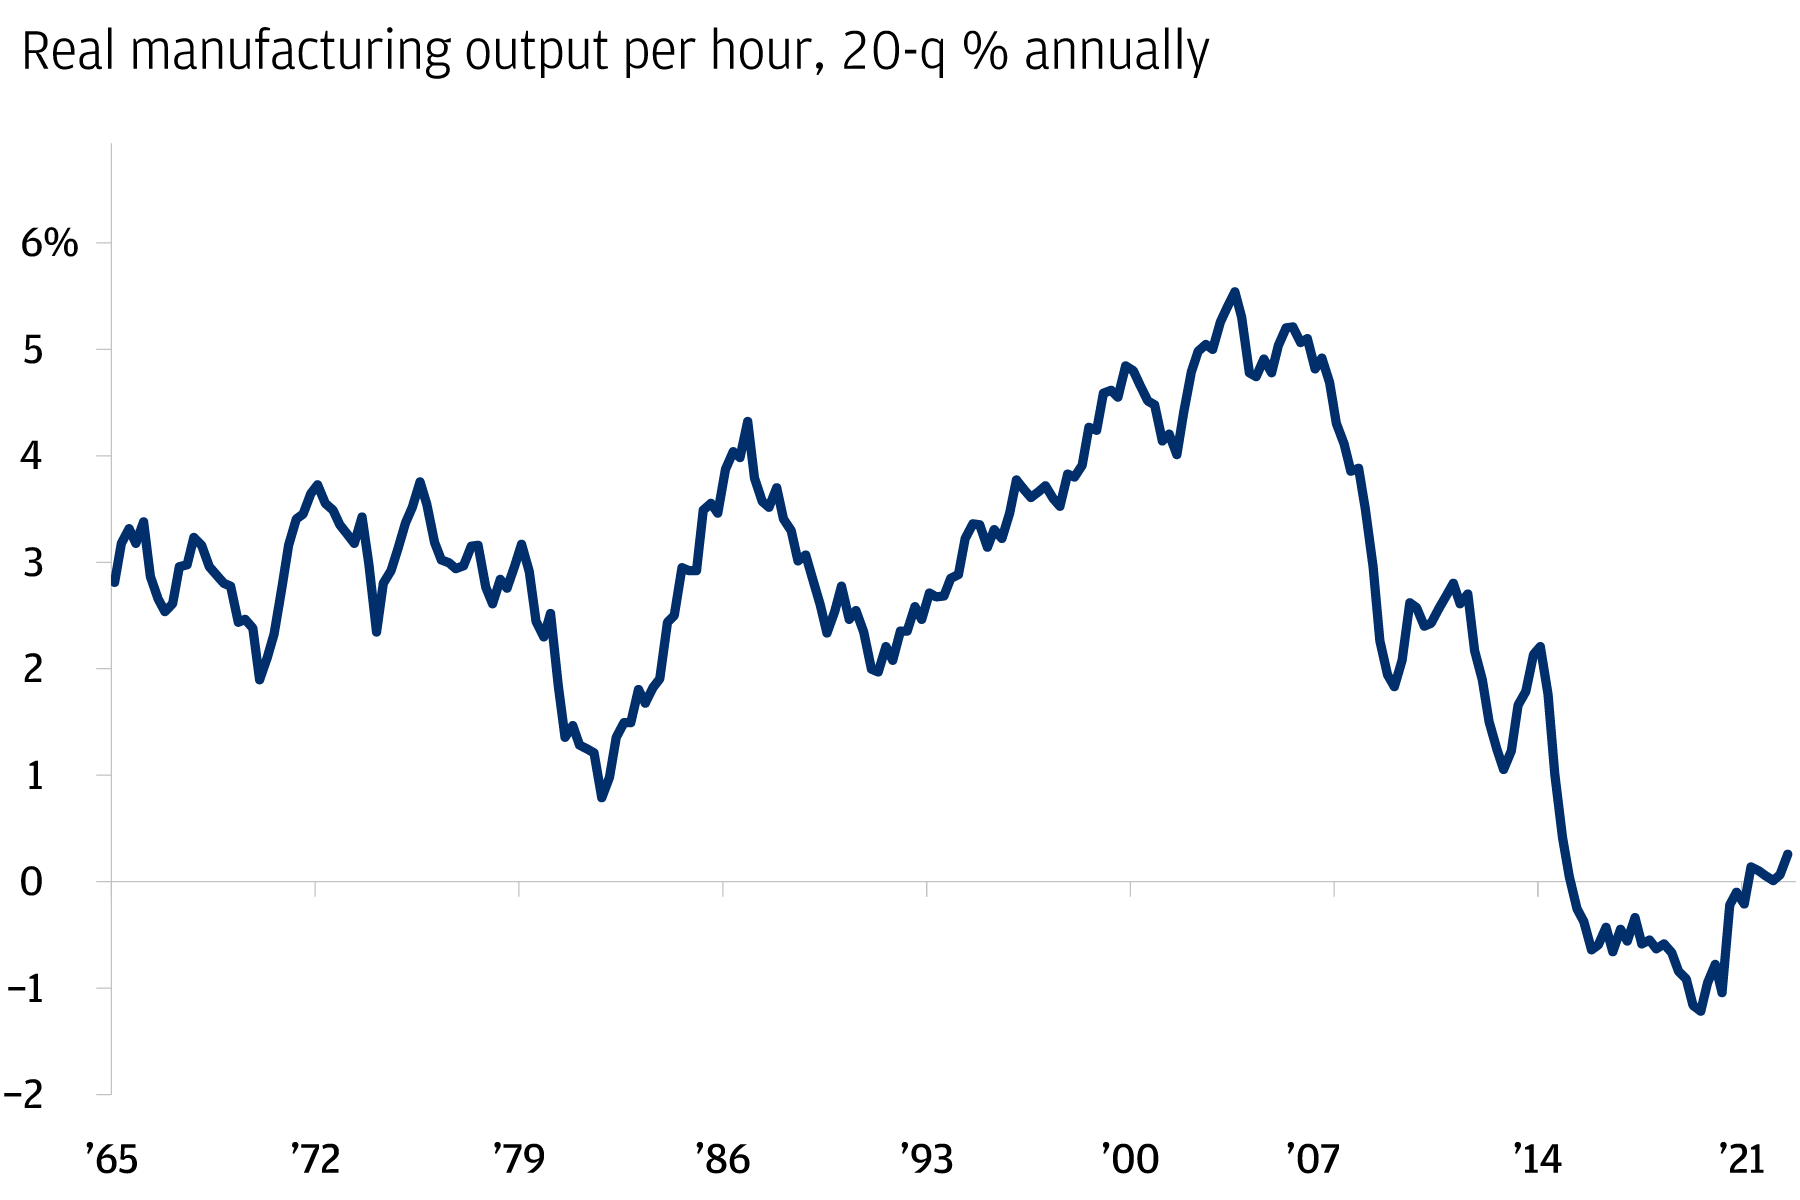 This chart describes real manufacturing output per hour since 1965 until 2022. 